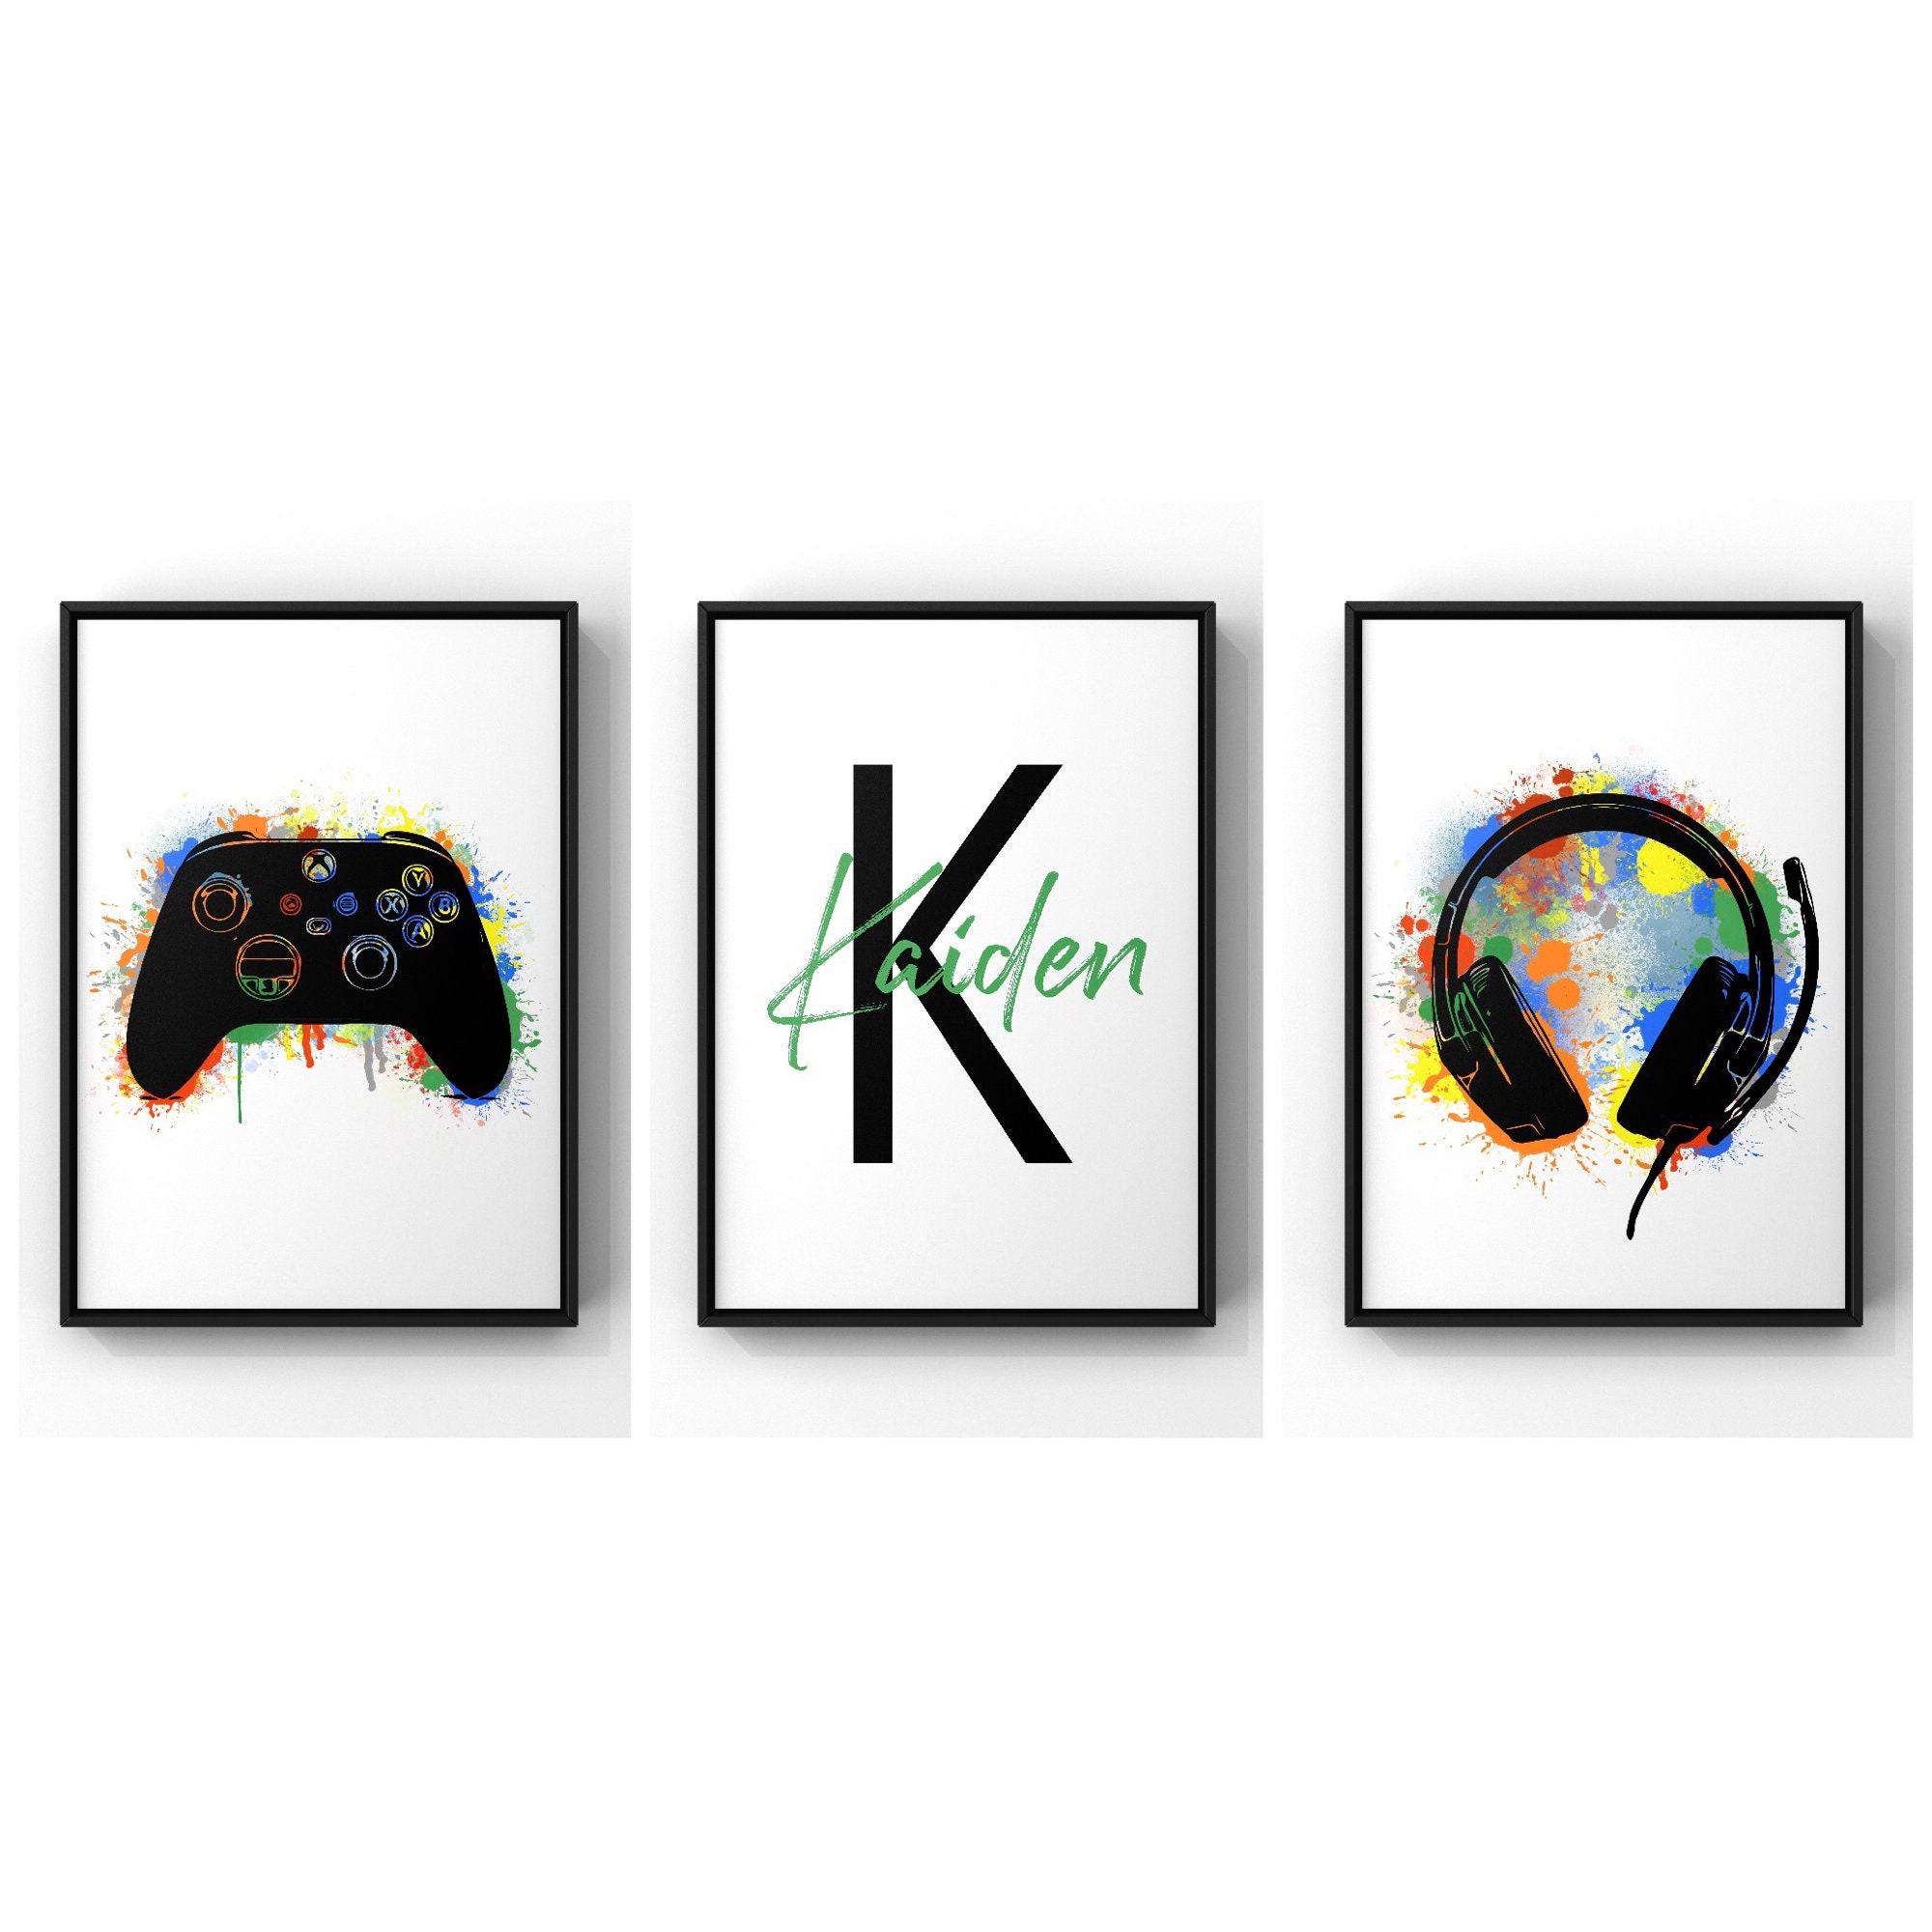 Personalised Male PC Gamer Print PC Gaming Set up Wall Art 